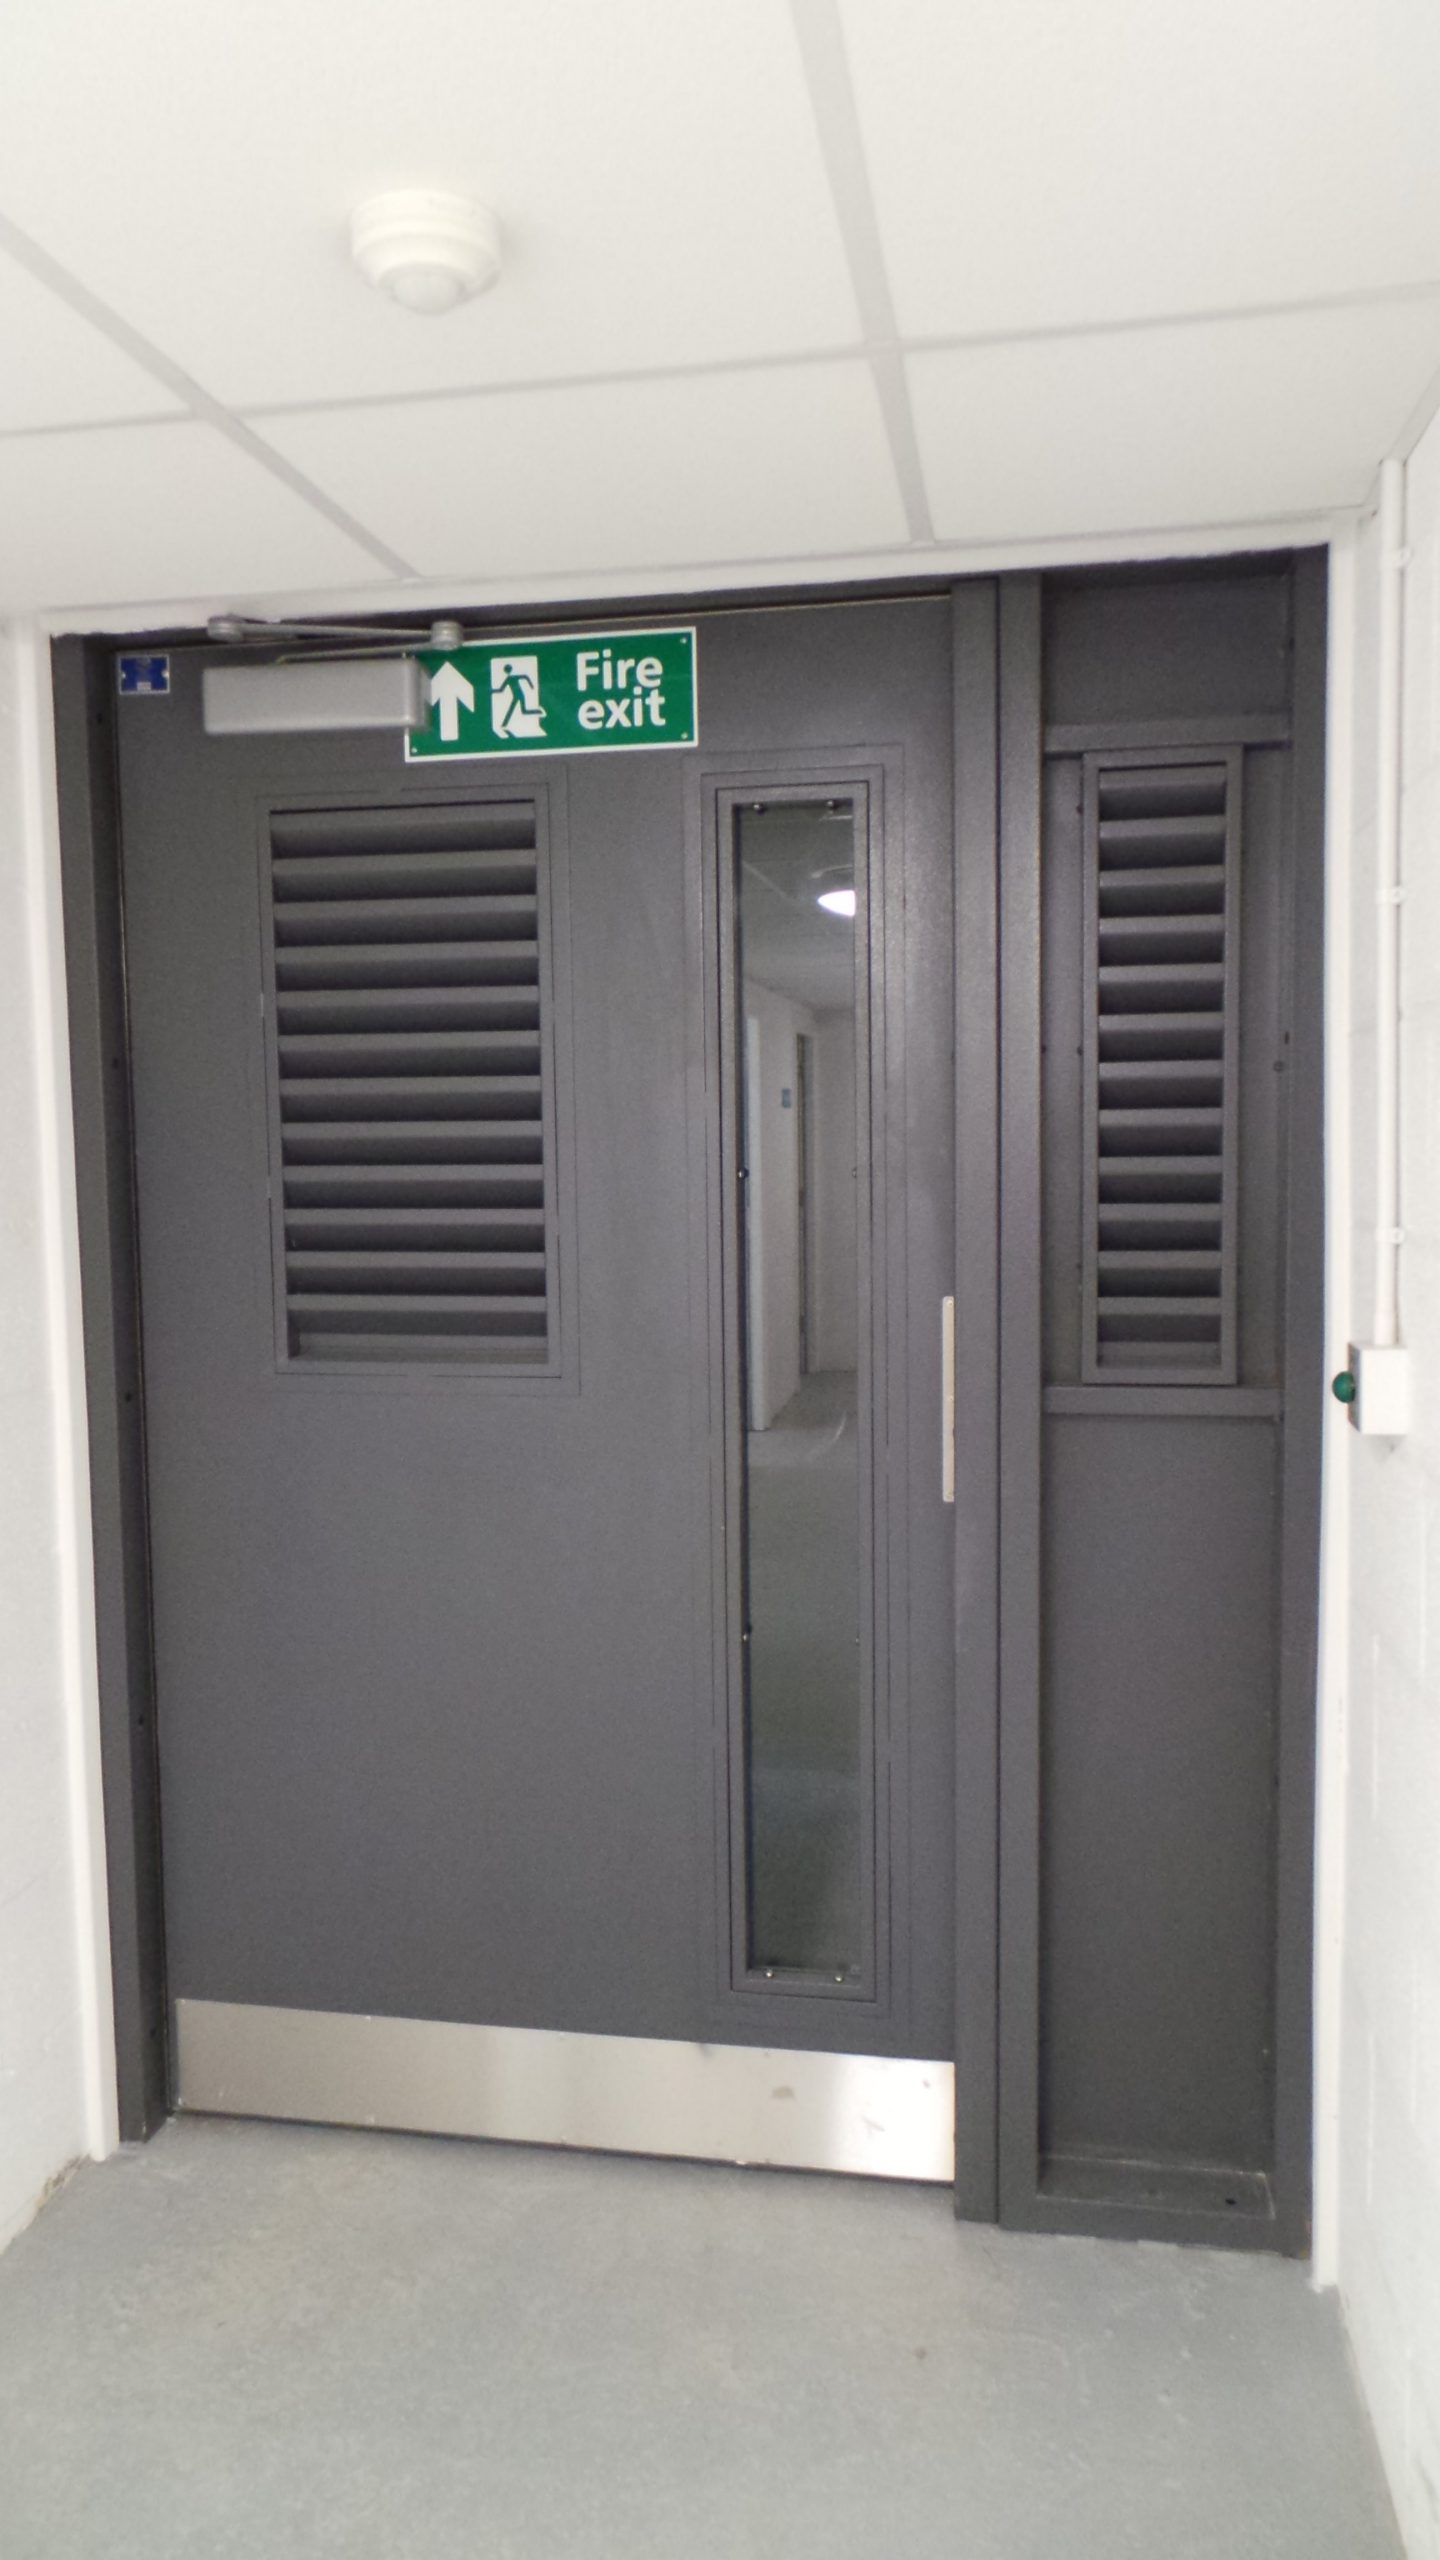 INDUSTRIAL STEEL DOORS WITH LOUVRE SECTIONS FABRICATED TO LPS1175 SR2 AND PAS24 STANDARD. PRODUCED AND INSTALLED BY PREMIER SECURITY CONSULTANTS LTD.